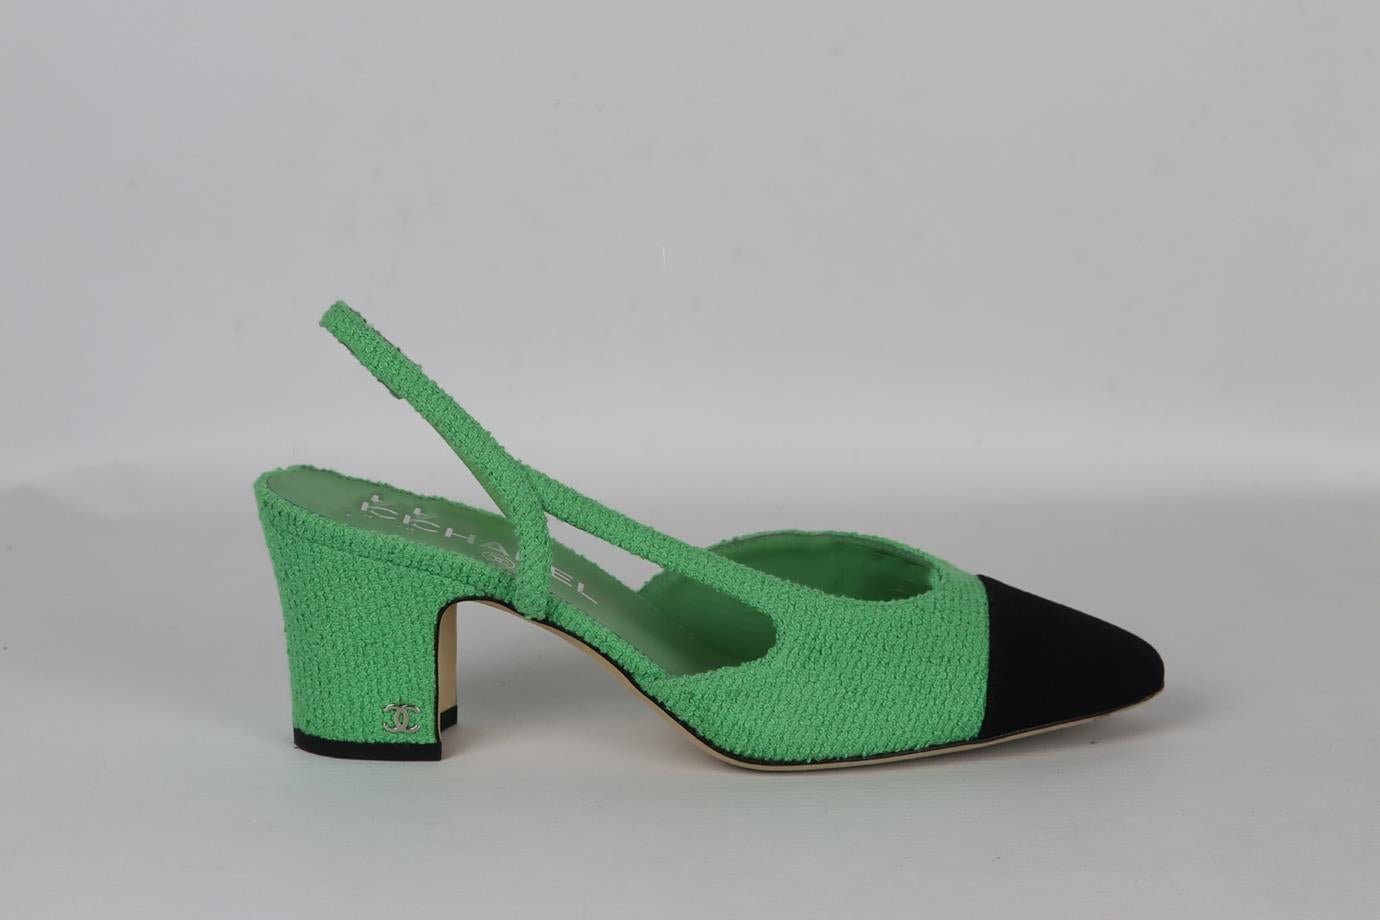 Chanel cc detailed tweed slingback pumps. Green and black. Pull on. Does not come with dustbag or box. Size: EU 39 (UK 6, US 9). Insole: 9.6 in. Heel Height: 2 in. Very good condition - Small mark at side. Light wear to soles; see pictures.
